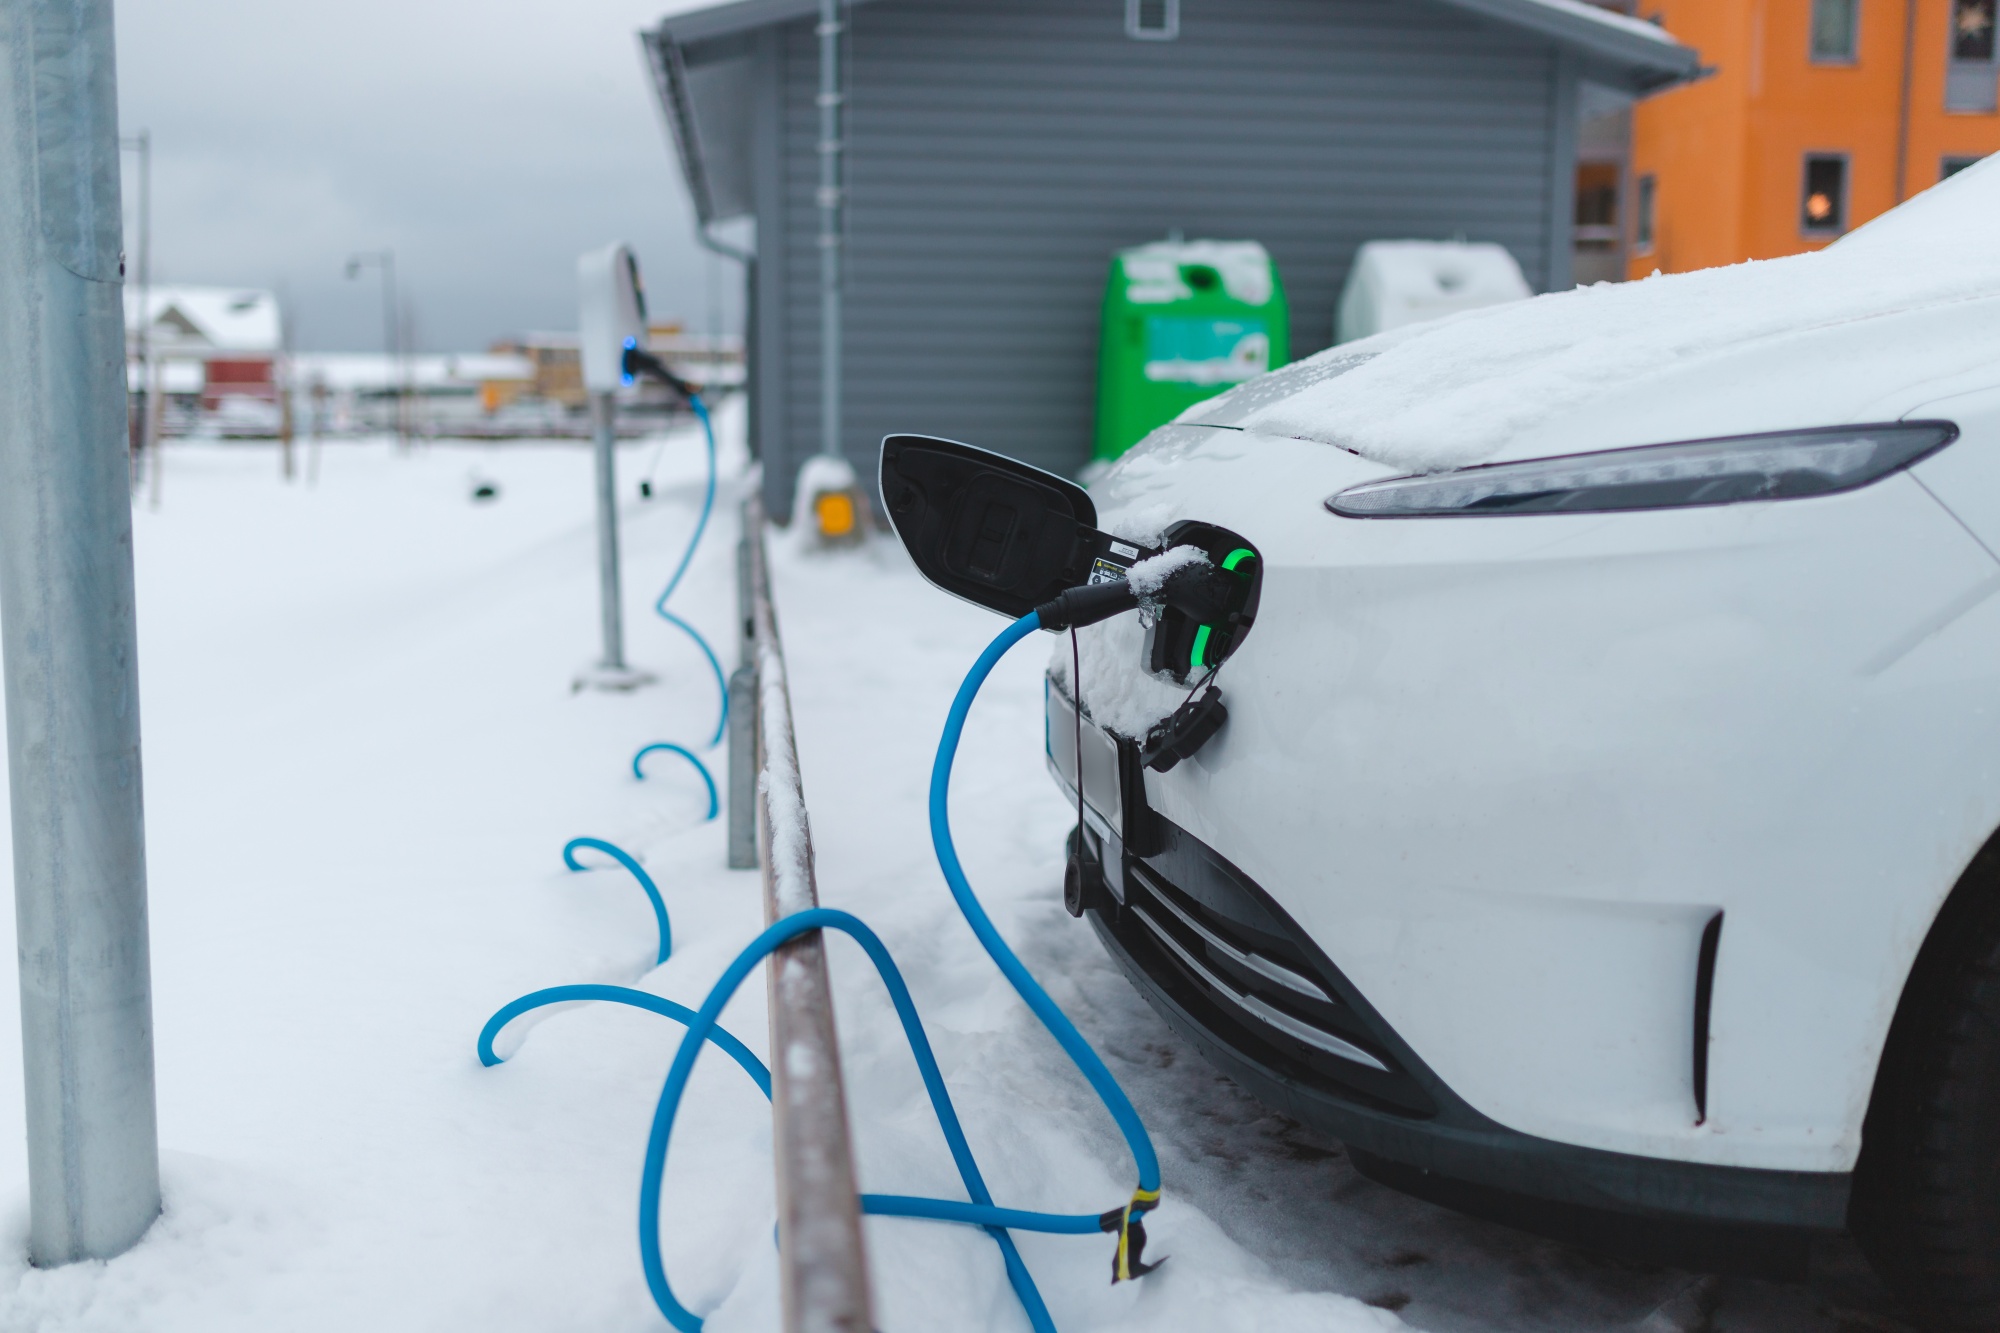 Chilly Temperatures Heighten Range Concerns for Electric Vehicle Drivers